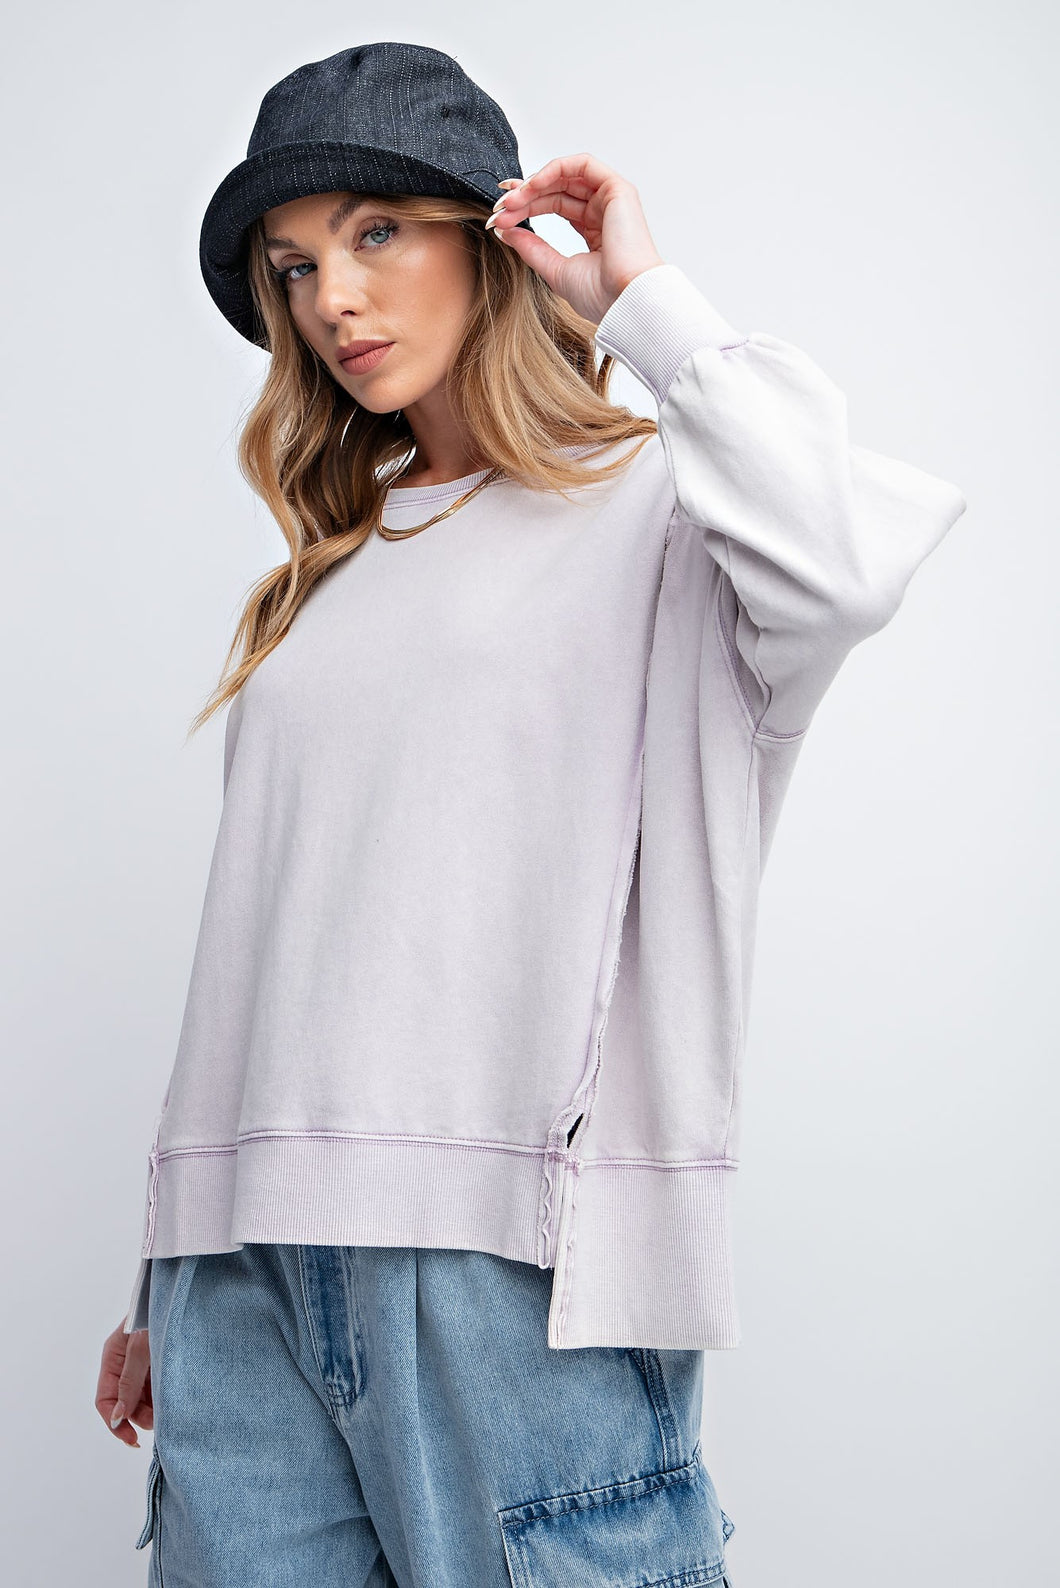 Easel Mineral Washed Pullover Top in Lavender Shirts & Tops Easel   